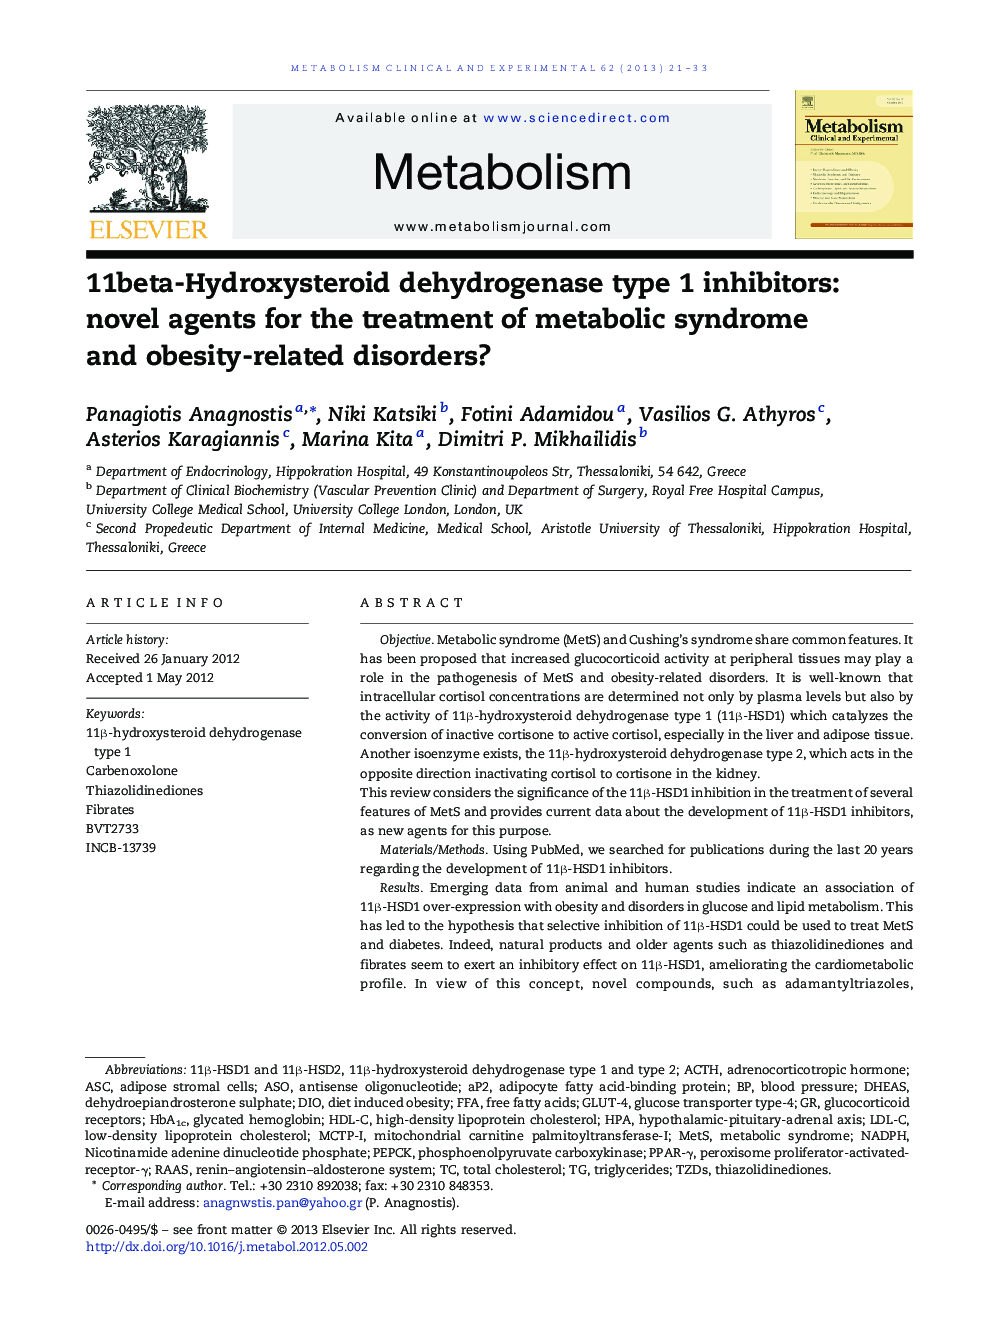 11beta-Hydroxysteroid dehydrogenase type 1 inhibitors: novel agents for the treatment of metabolic syndrome and obesity-related disorders?